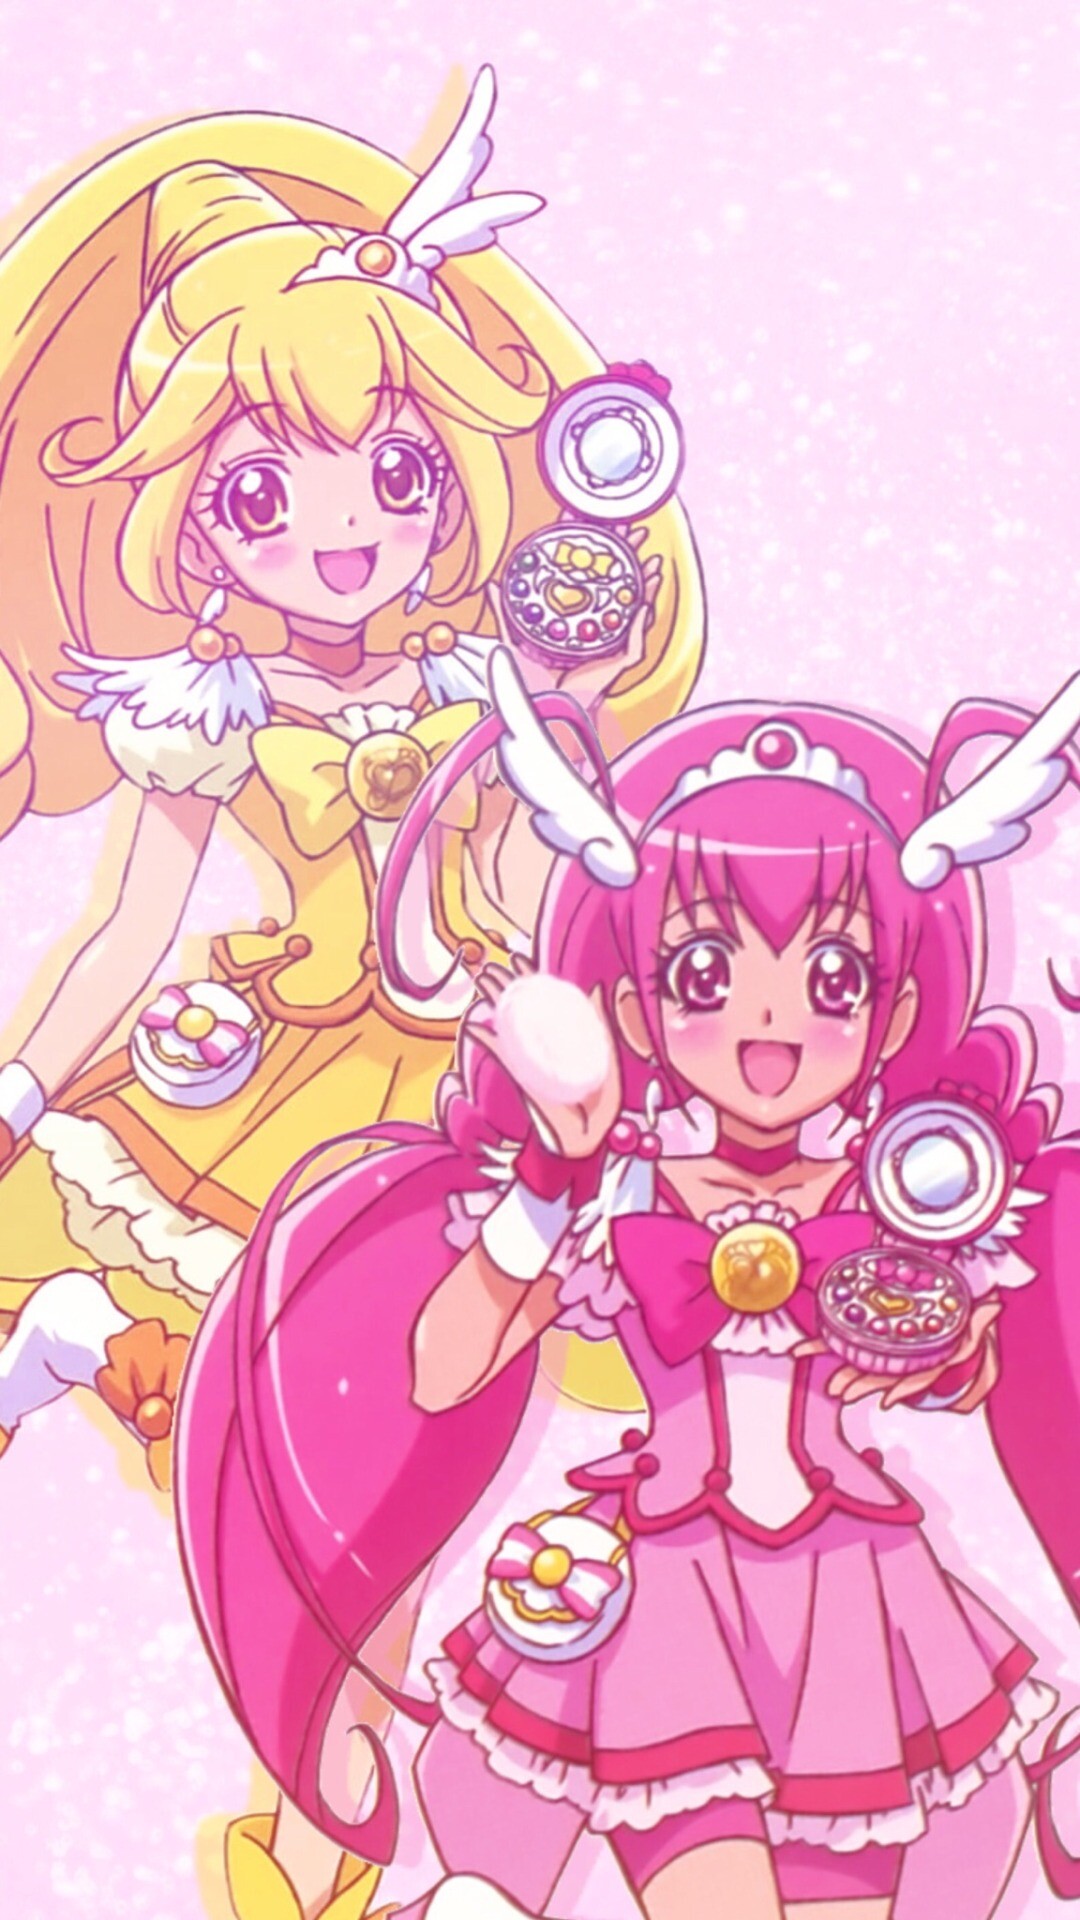 Glitter Force: Smile Precure! ideas, Cure Decors magical tokens, Cure Happy and Peace, Fan art. 1080x1920 Full HD Wallpaper.